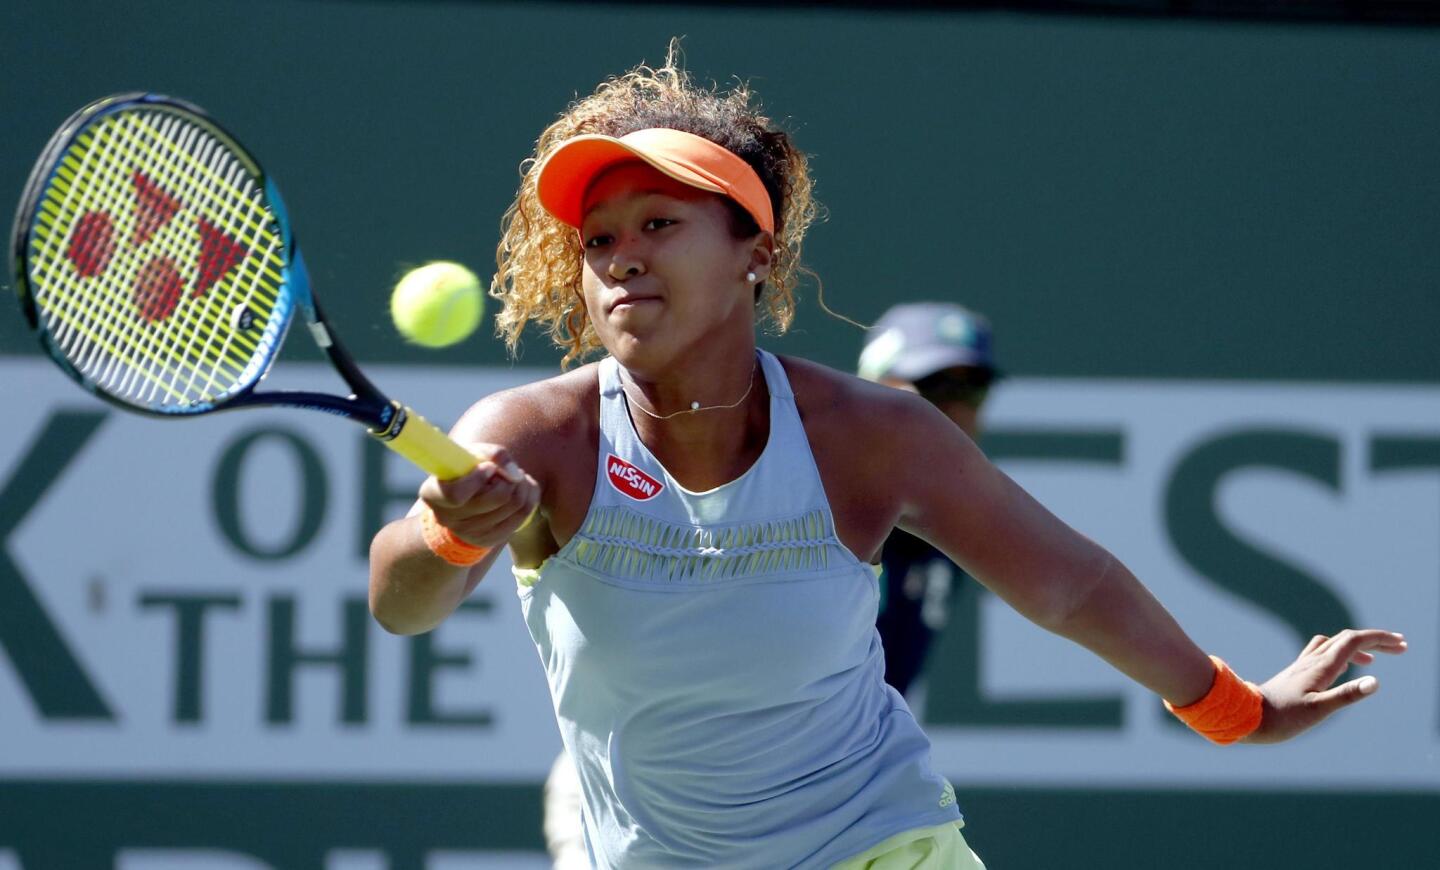 MAN05. Indian Wells (United States), 18/03/2018.- Naomi Osaka from Japan in action against Daria Kasatkina from Russia in their finals match of the BNP Paribas Open at the Indian Wells Tennis Garden in Indian Wells, California, USA, 18 March 2018. (Abierto, Tenis, Rusia, Japón, Estados Unidos) EFE/EPA/MIKE NELSON ** Usable by HOY and SD Only **